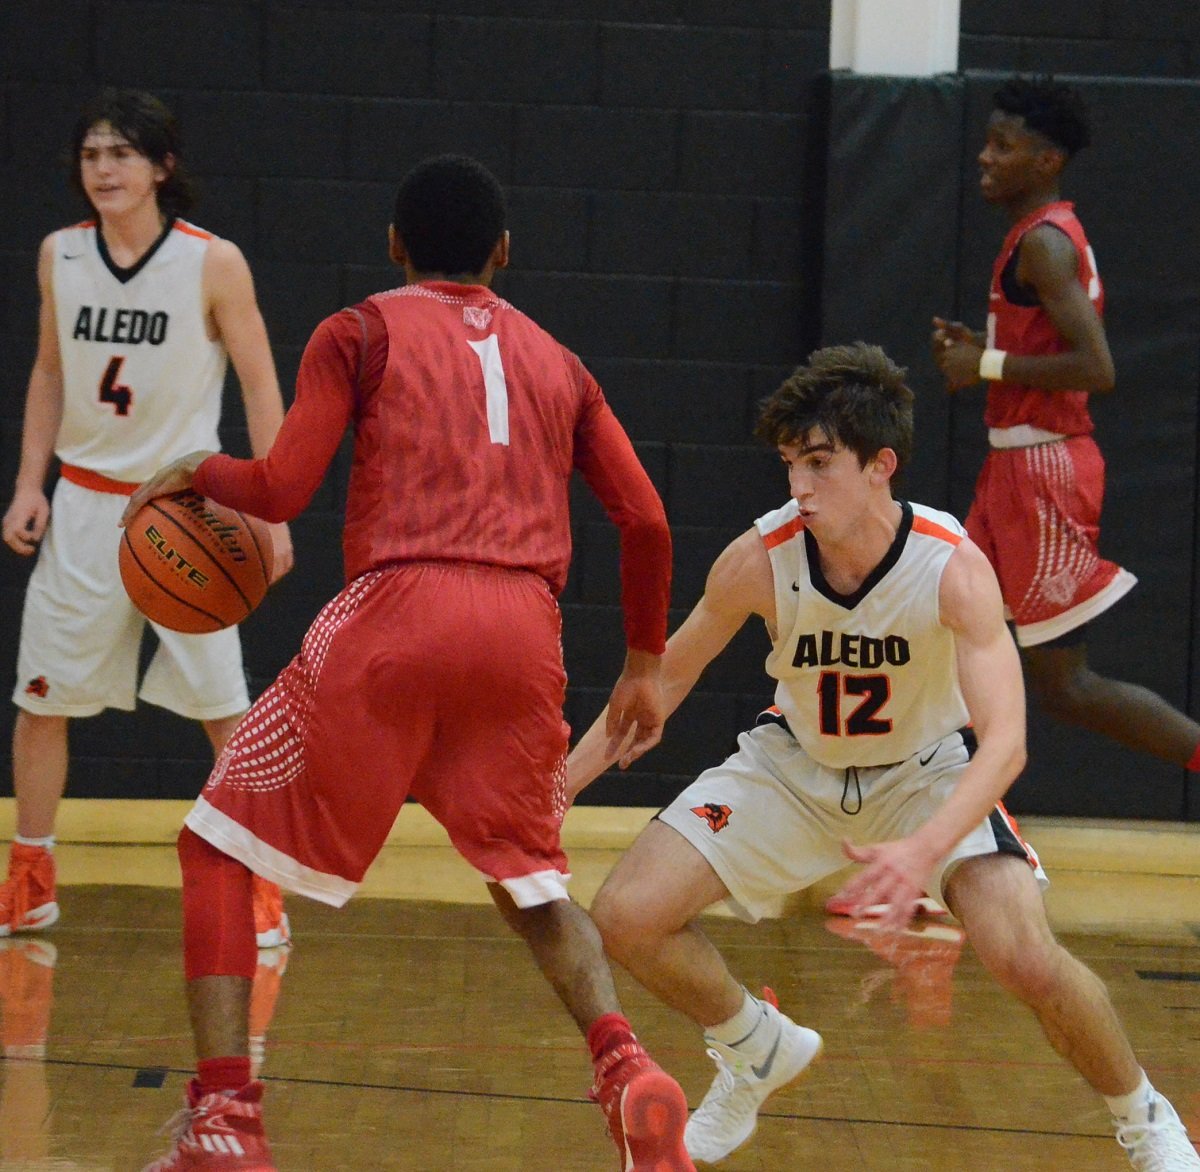 Aledo junior guard Cameron Yates (12) puts pressure on a Terrell guard Tuesday night during the Bearcats' 54-42 loss to the Tigers. Photo by Tony Eierdam.